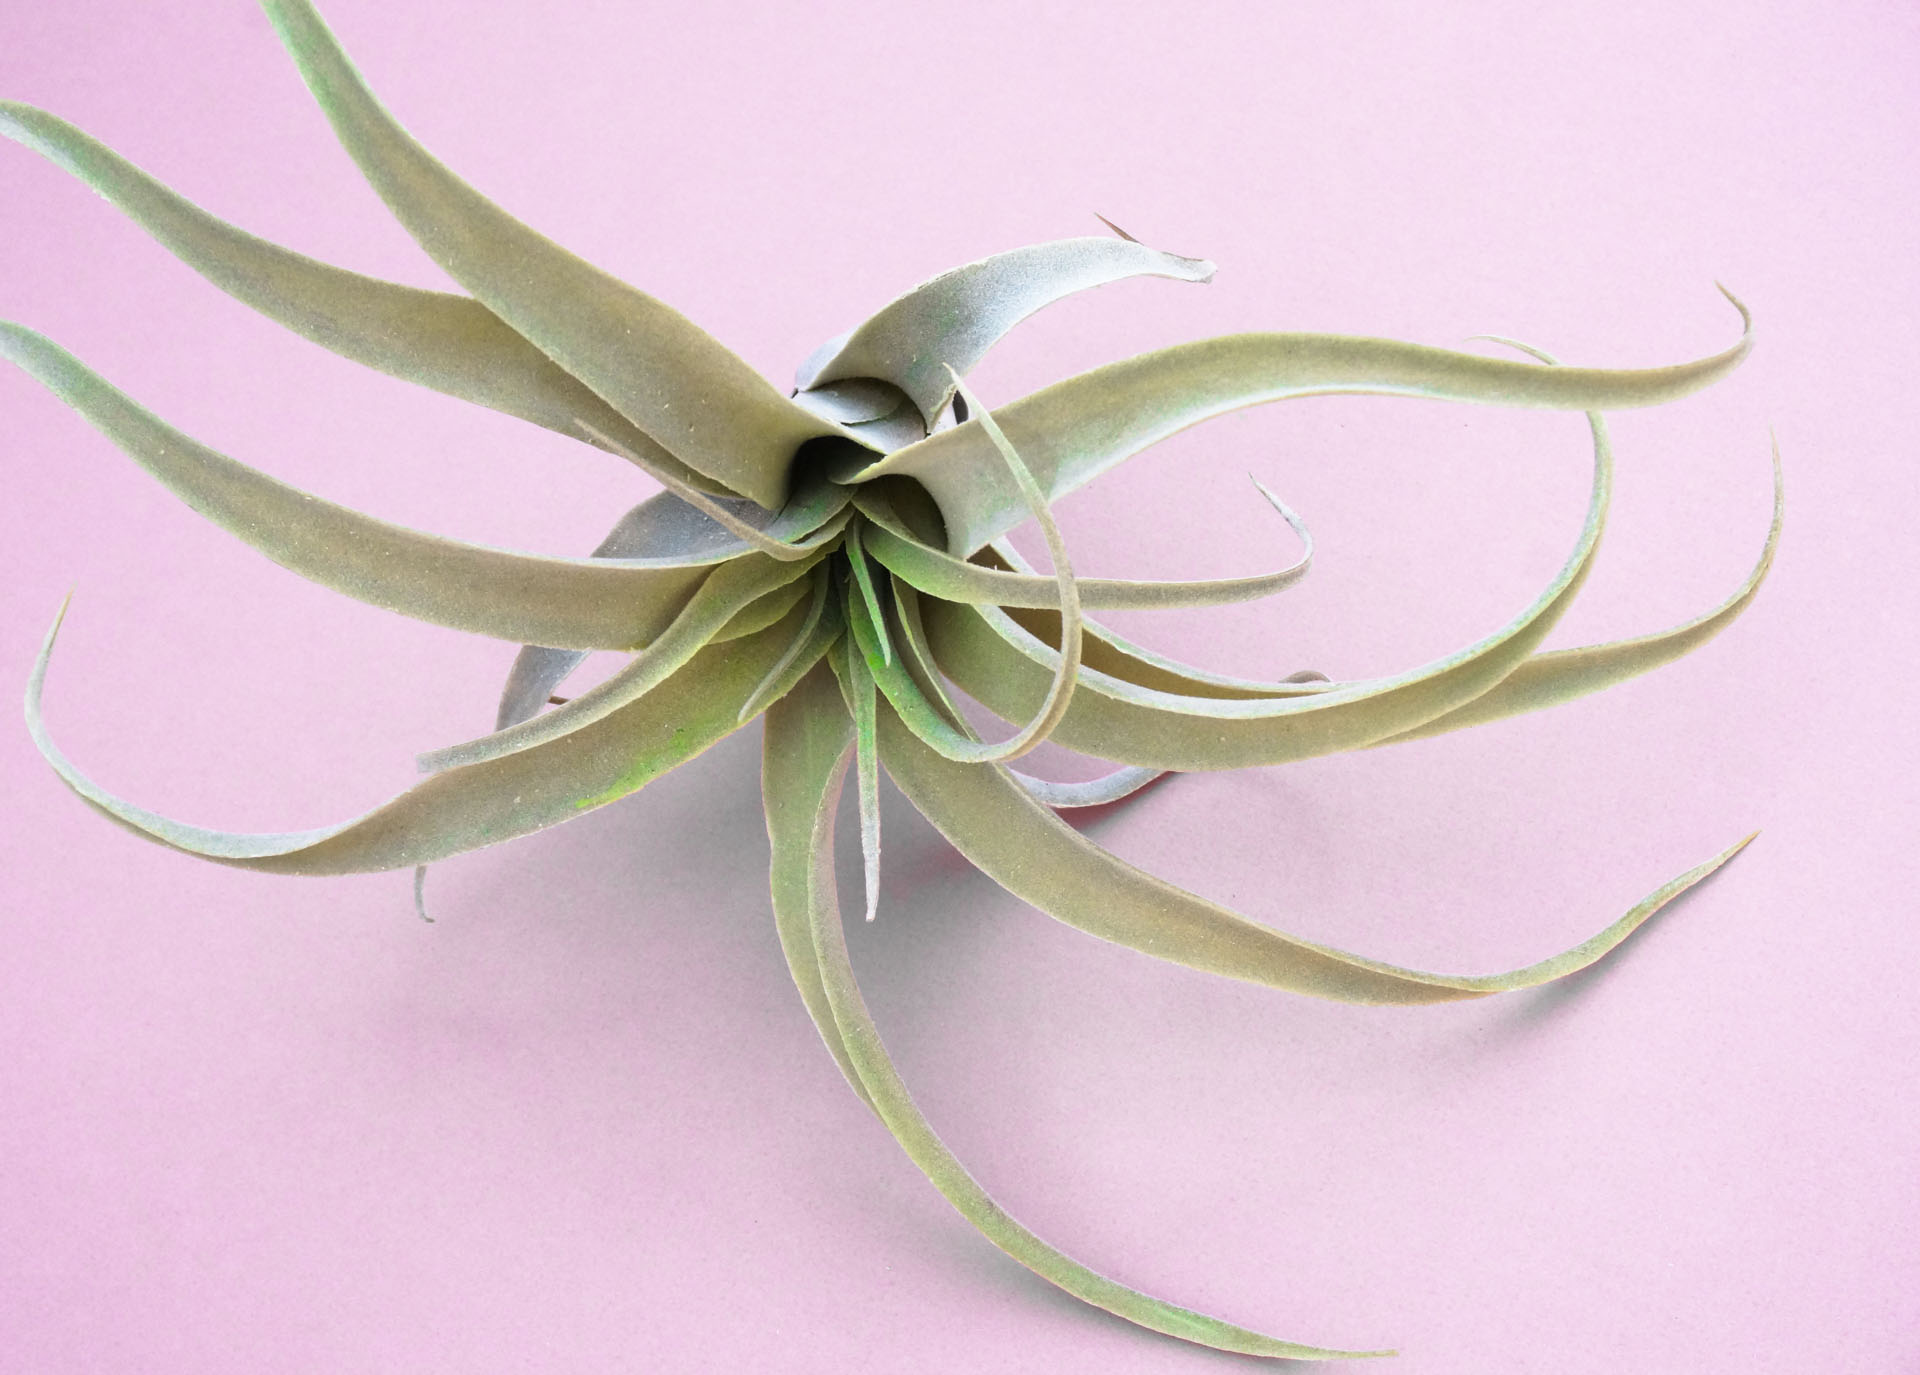 Air plants are gaining popularity